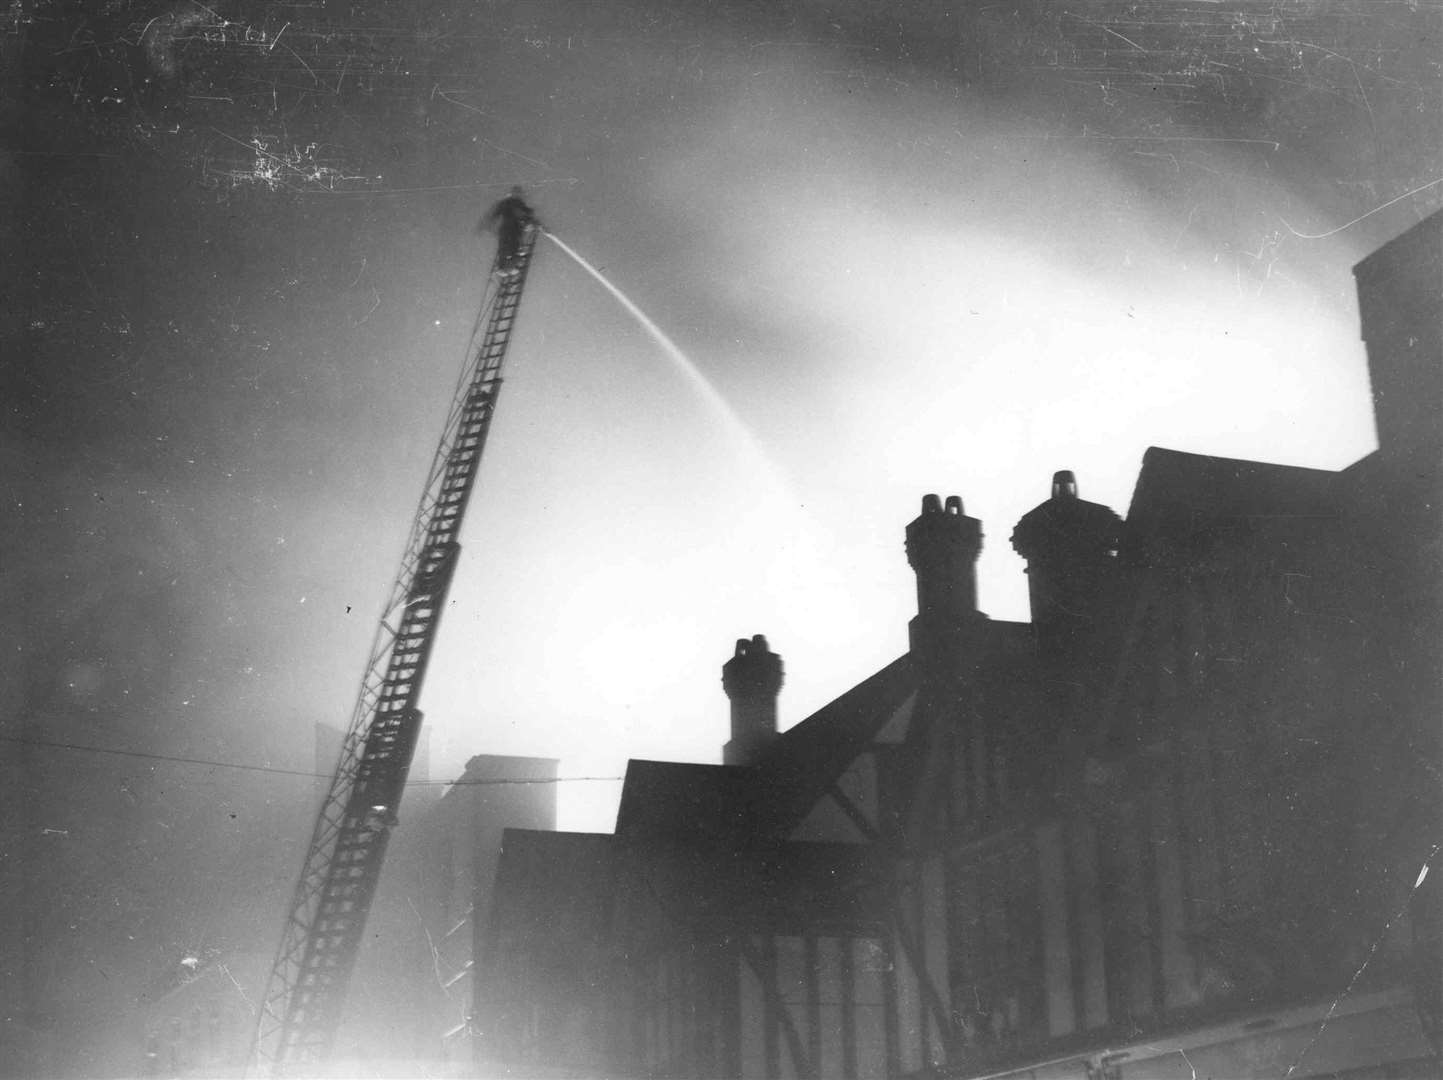 Fire at the Ritz Cinema in Maidstone in January 1954